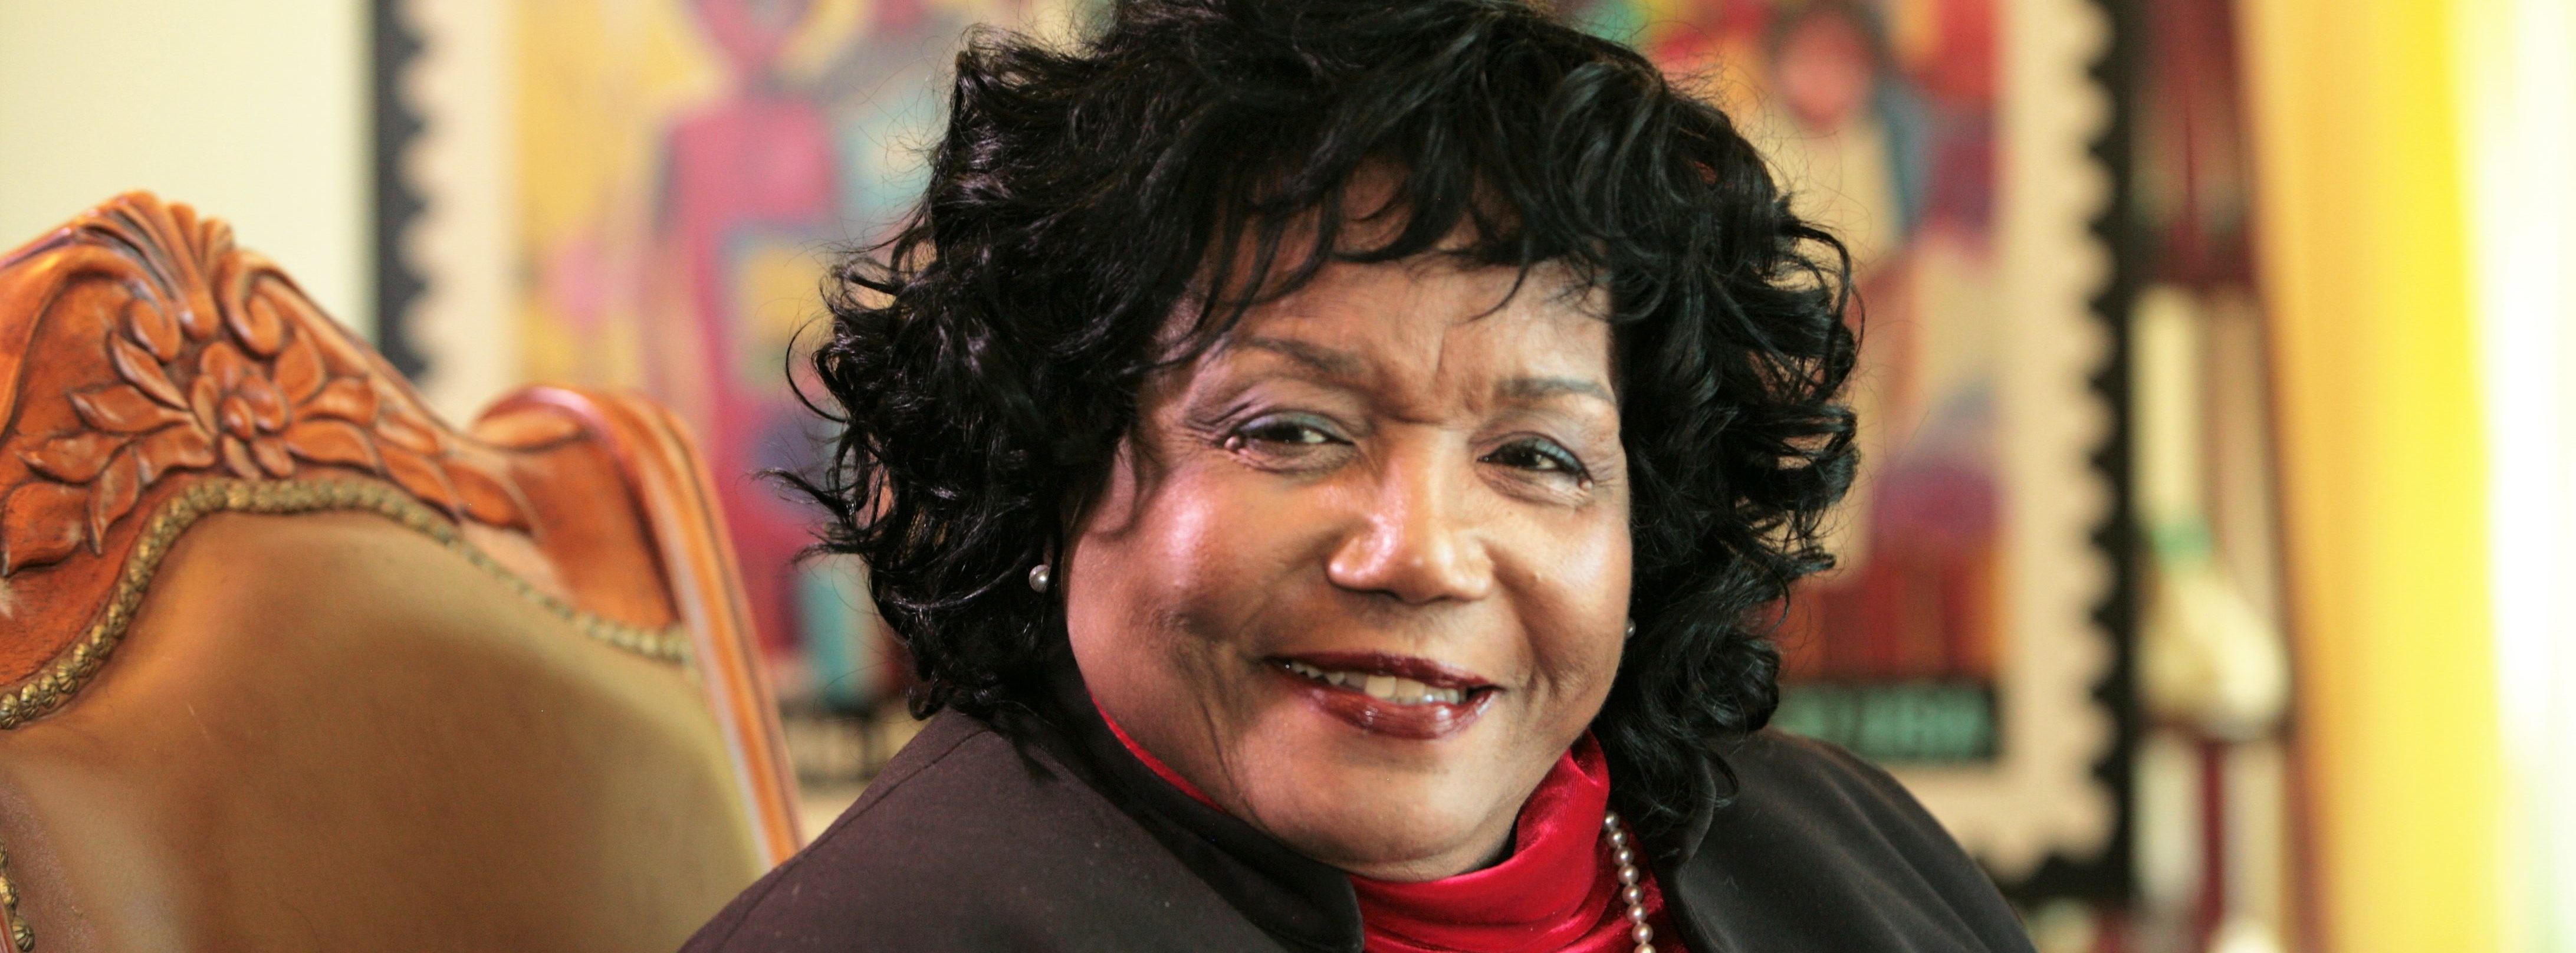 Ouachita will host Melba Pattillo Beals, a member of the Little Rock Nine, for a lecture on Tuesday, April 2, in Jones Performing Arts Center. Beals is an American journalist and author.